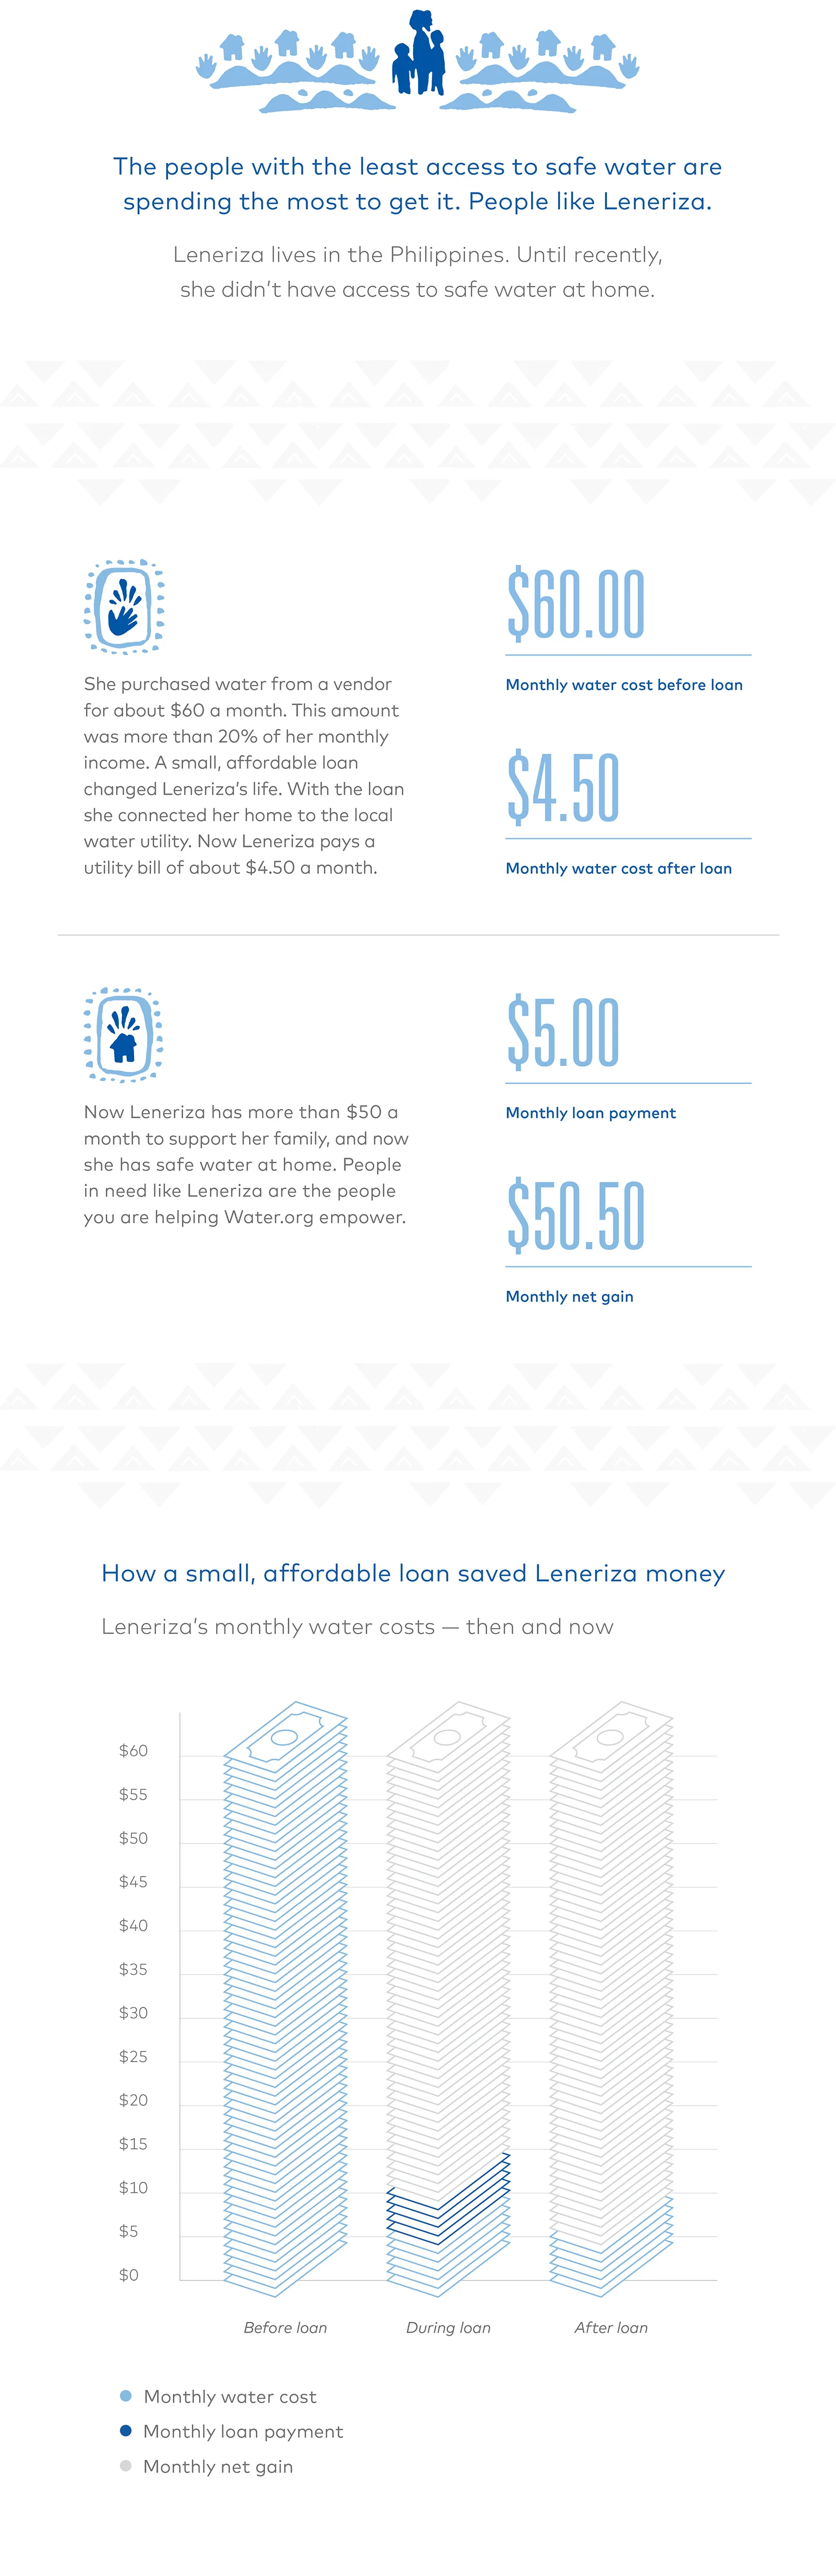 Leneriza's monthly water costs - then and now